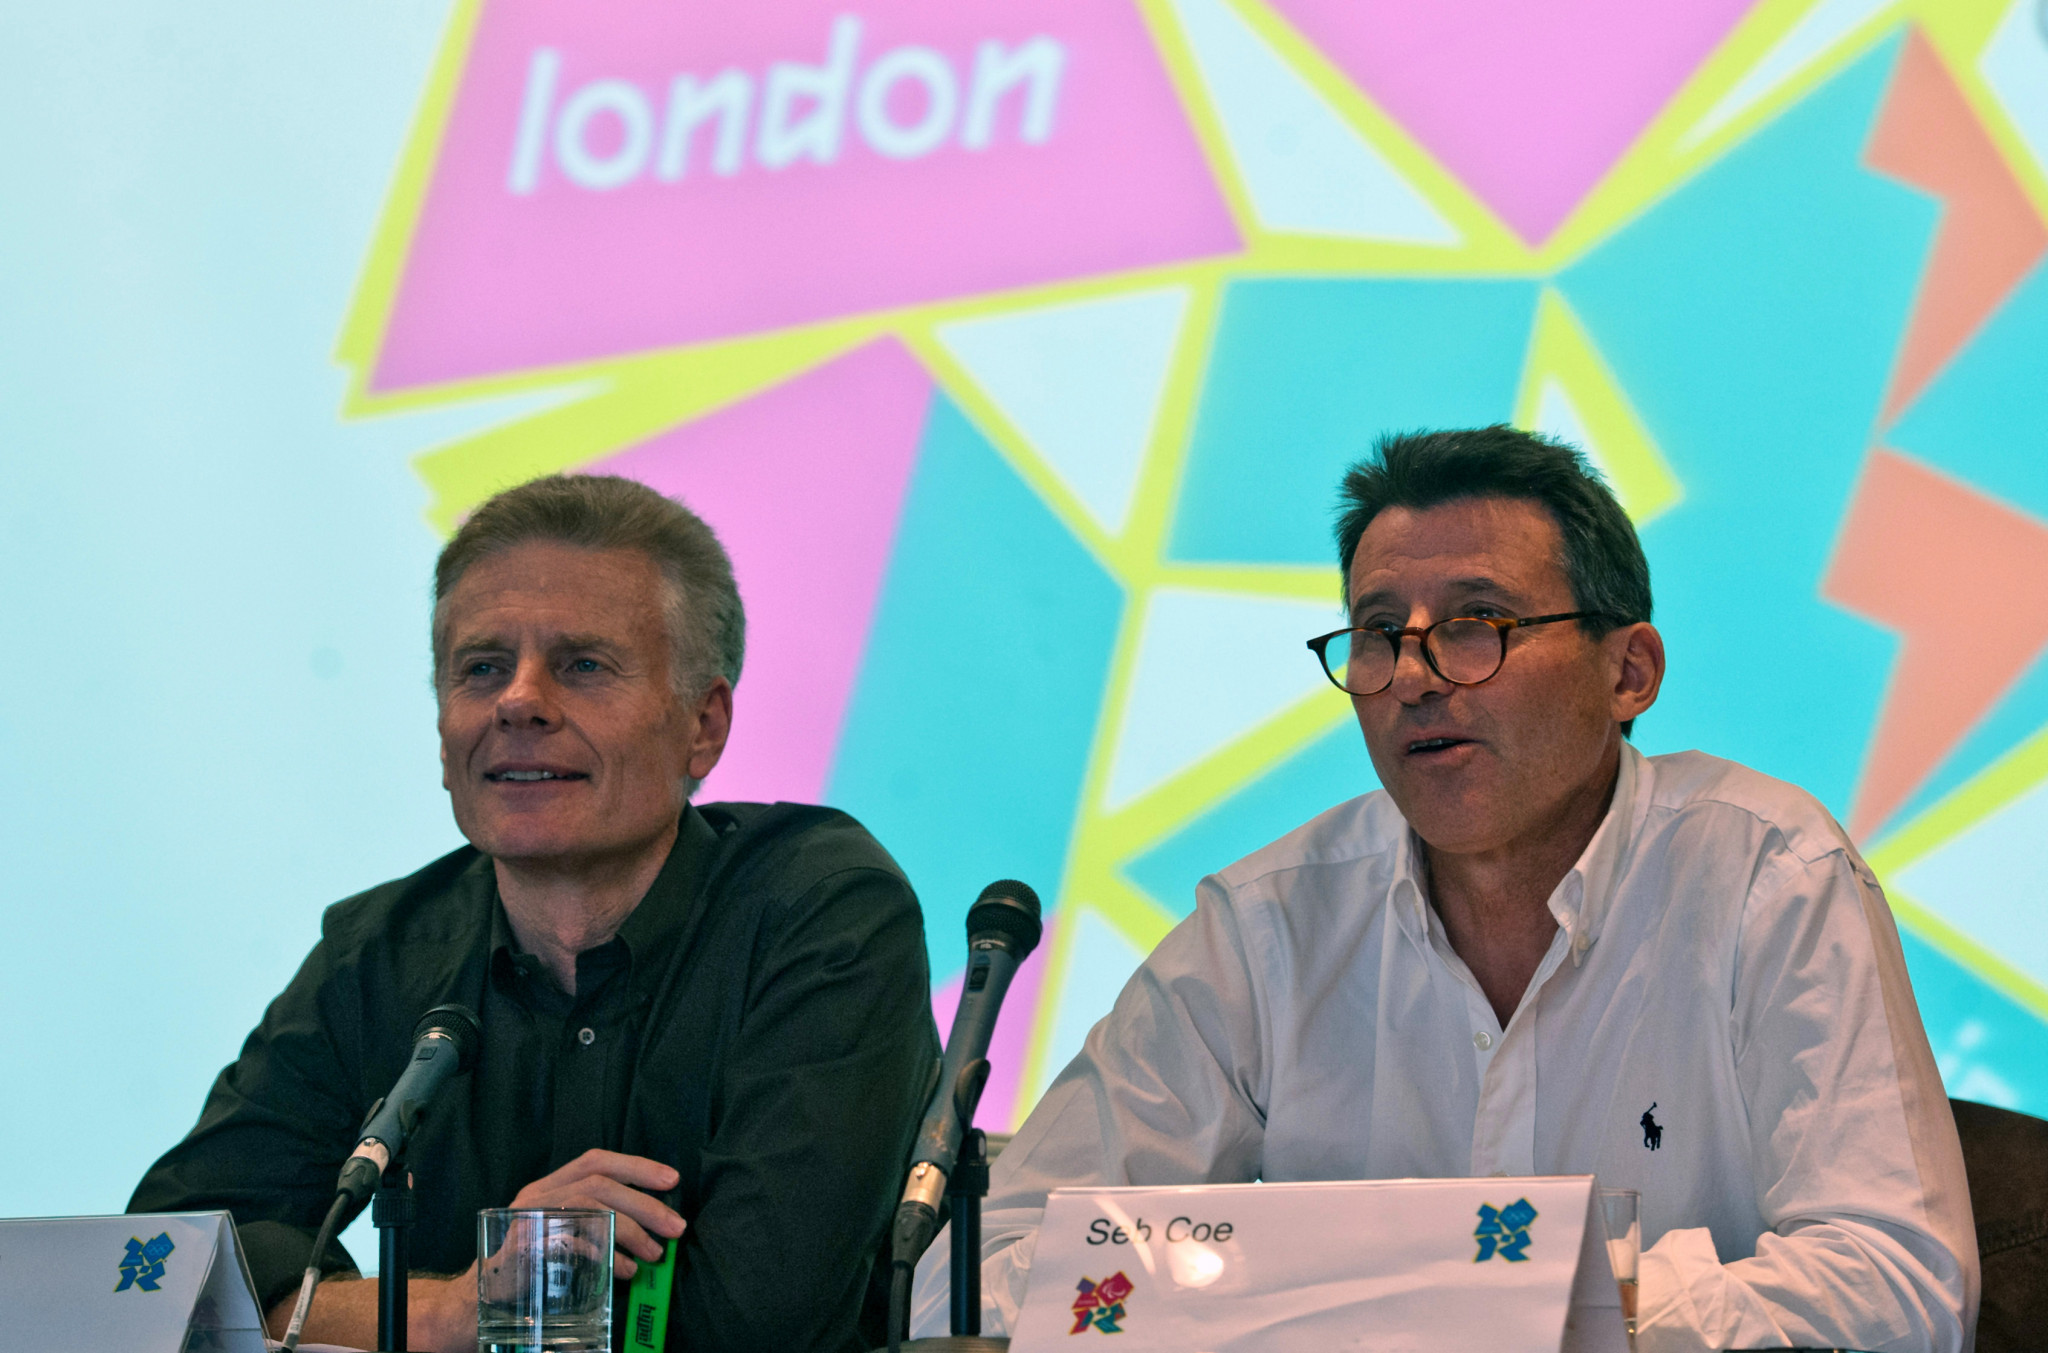 One of Sebastian Coe's greatest assets has been his ability to surround himself with good people, like at London 2012 when he appointed former Goldman Sachs banker Paul Deighton, left, as chief executive ©Getty Images